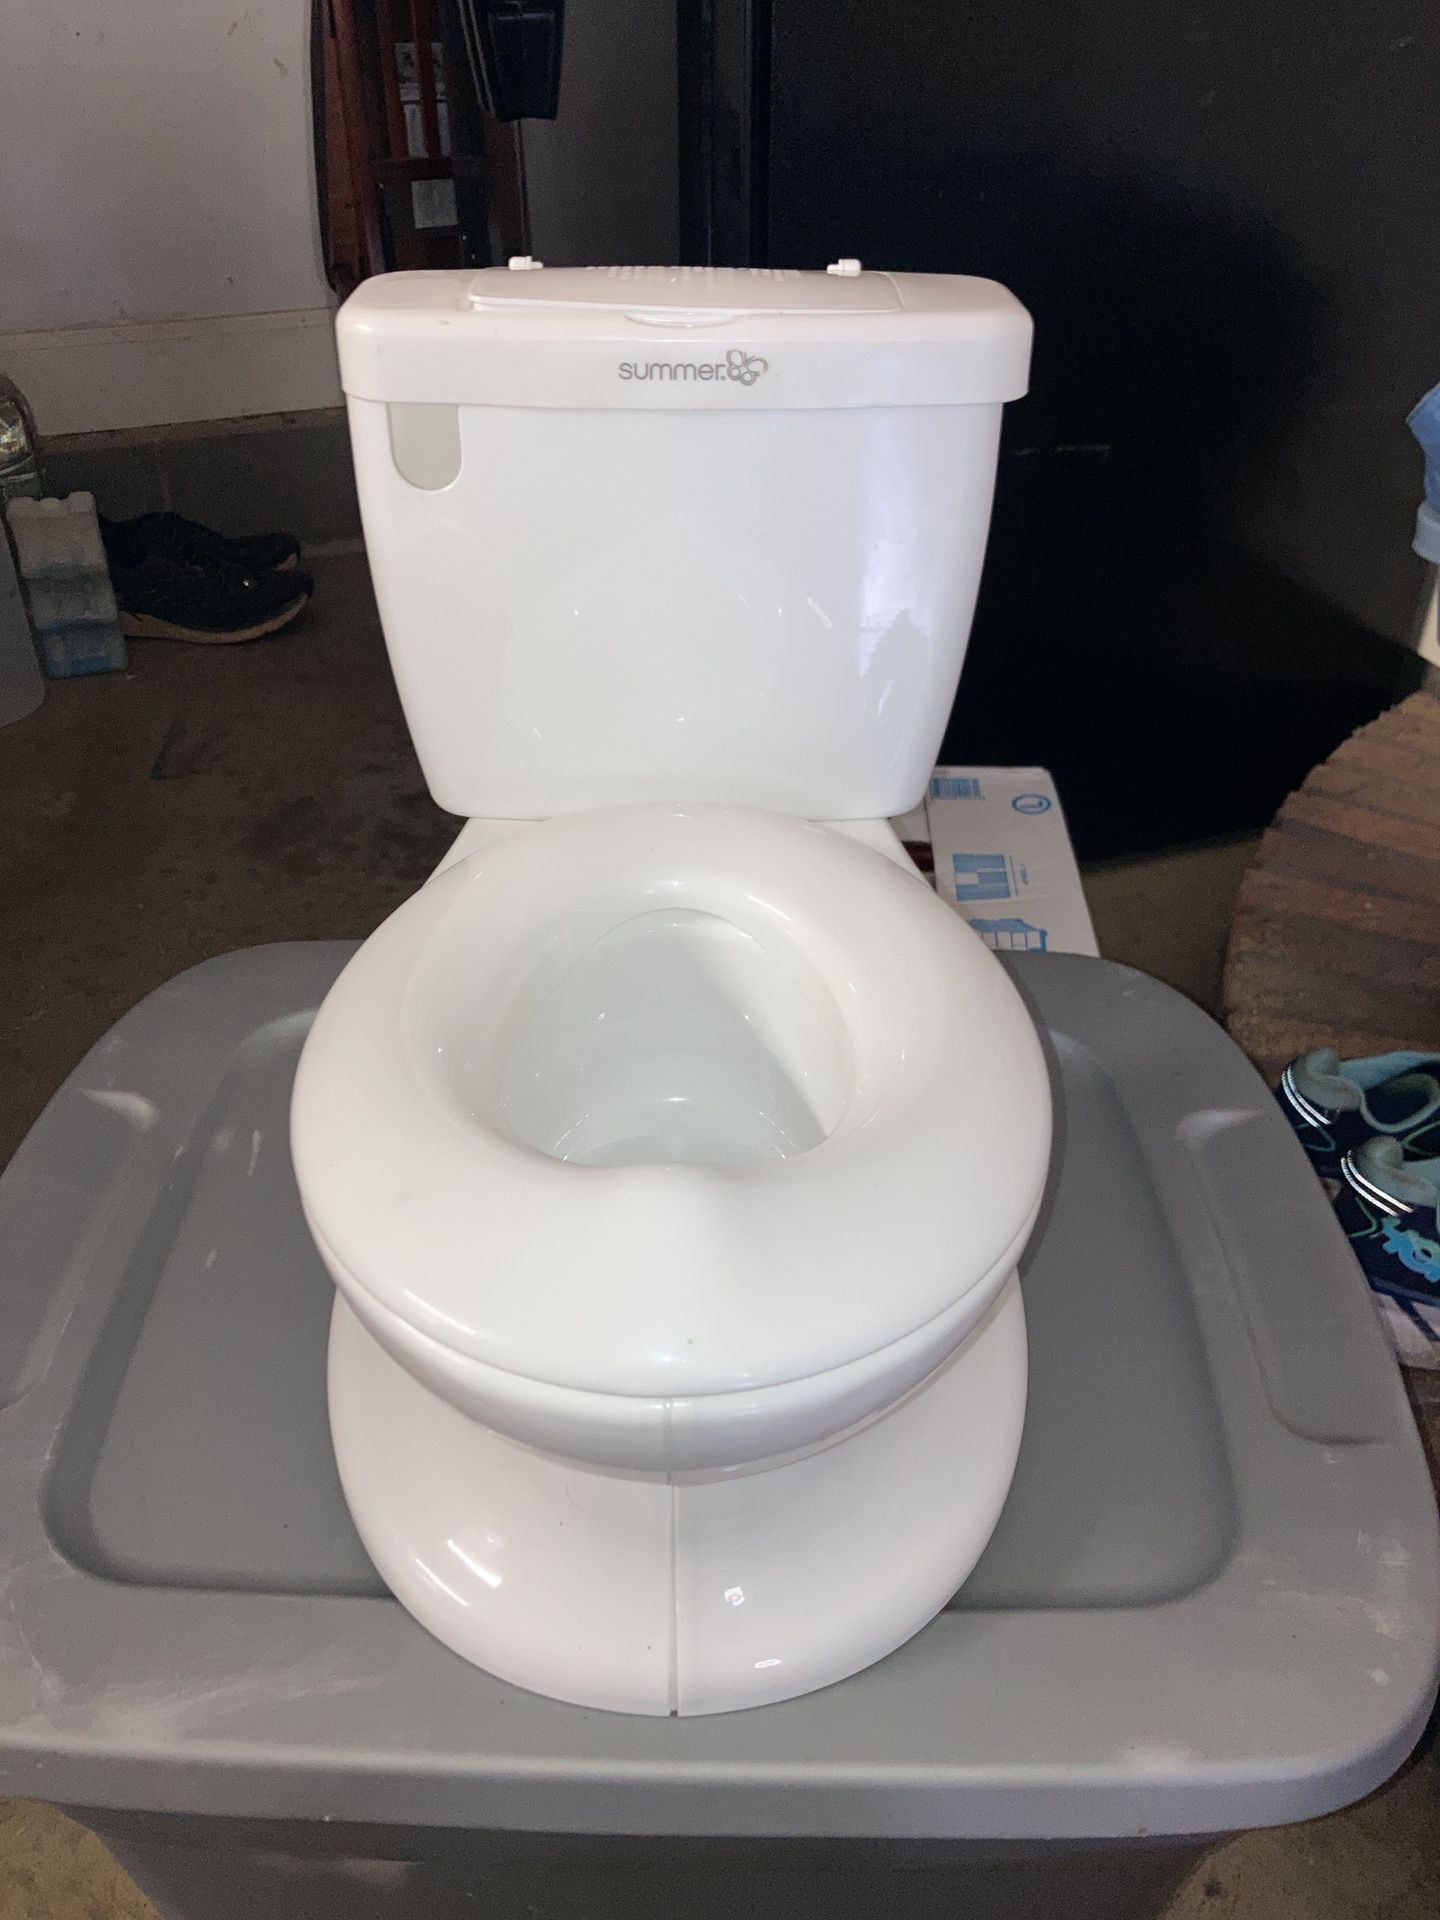 Summer Toilet For Baby 